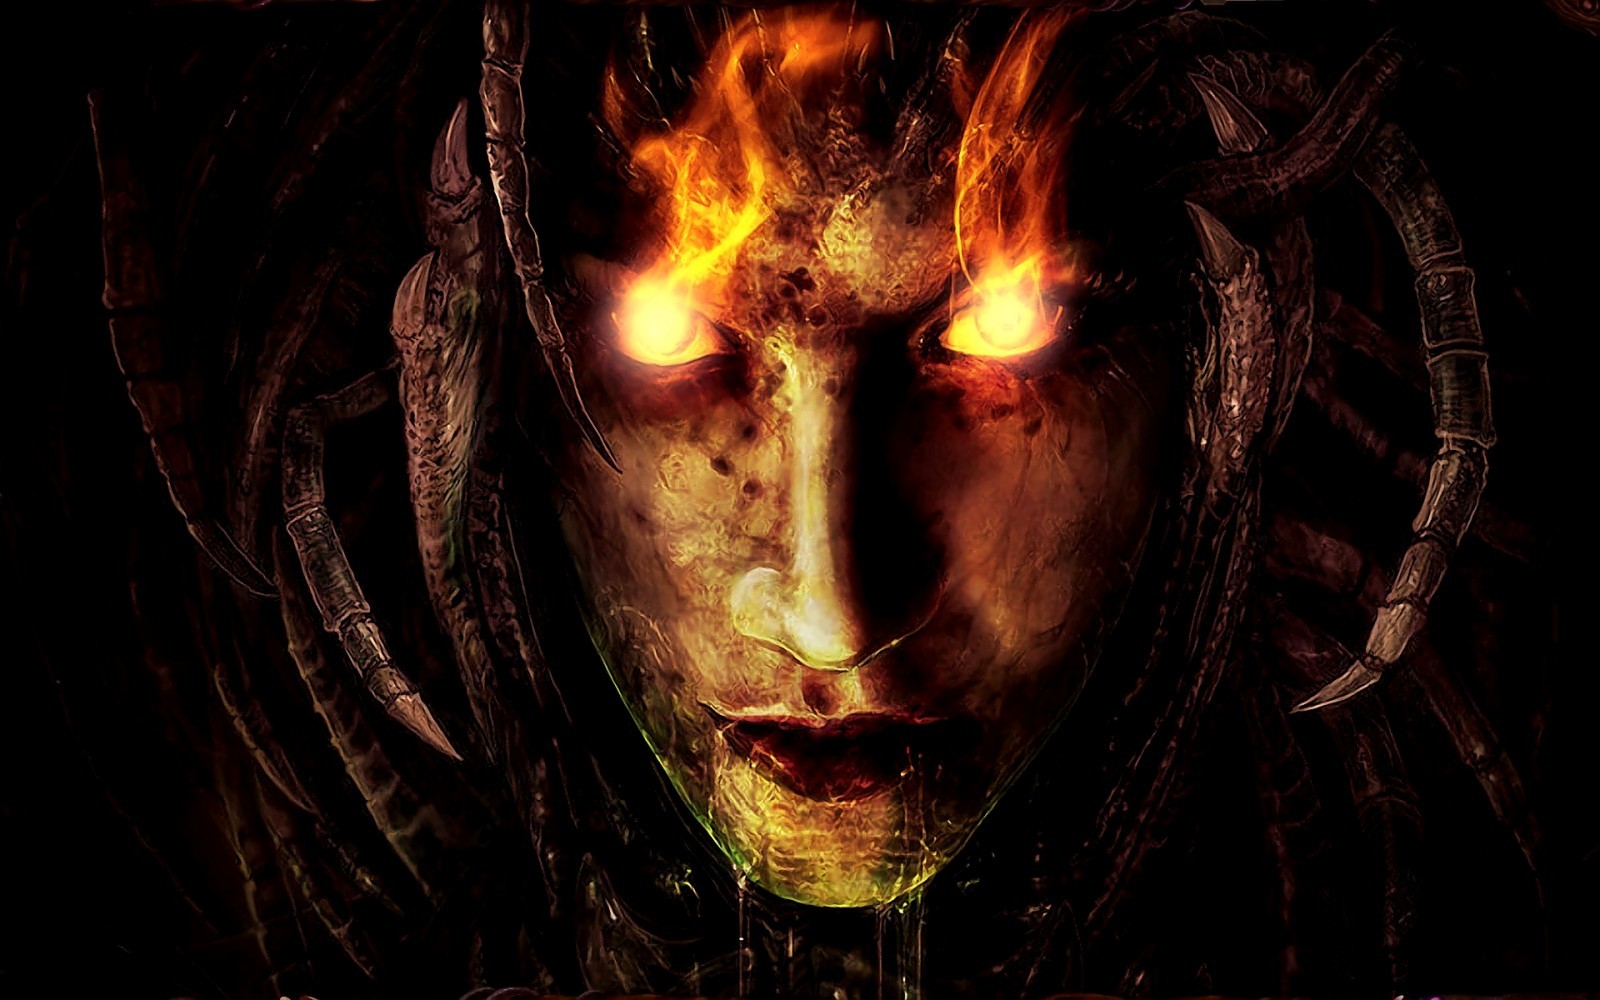 General 1600x1000 Starcraft II Blizzard Entertainment Sarah Kerrigan StarCraft StarCraft II : Heart Of The Swarm video games PC gaming glowing eyes creature video game art science fiction